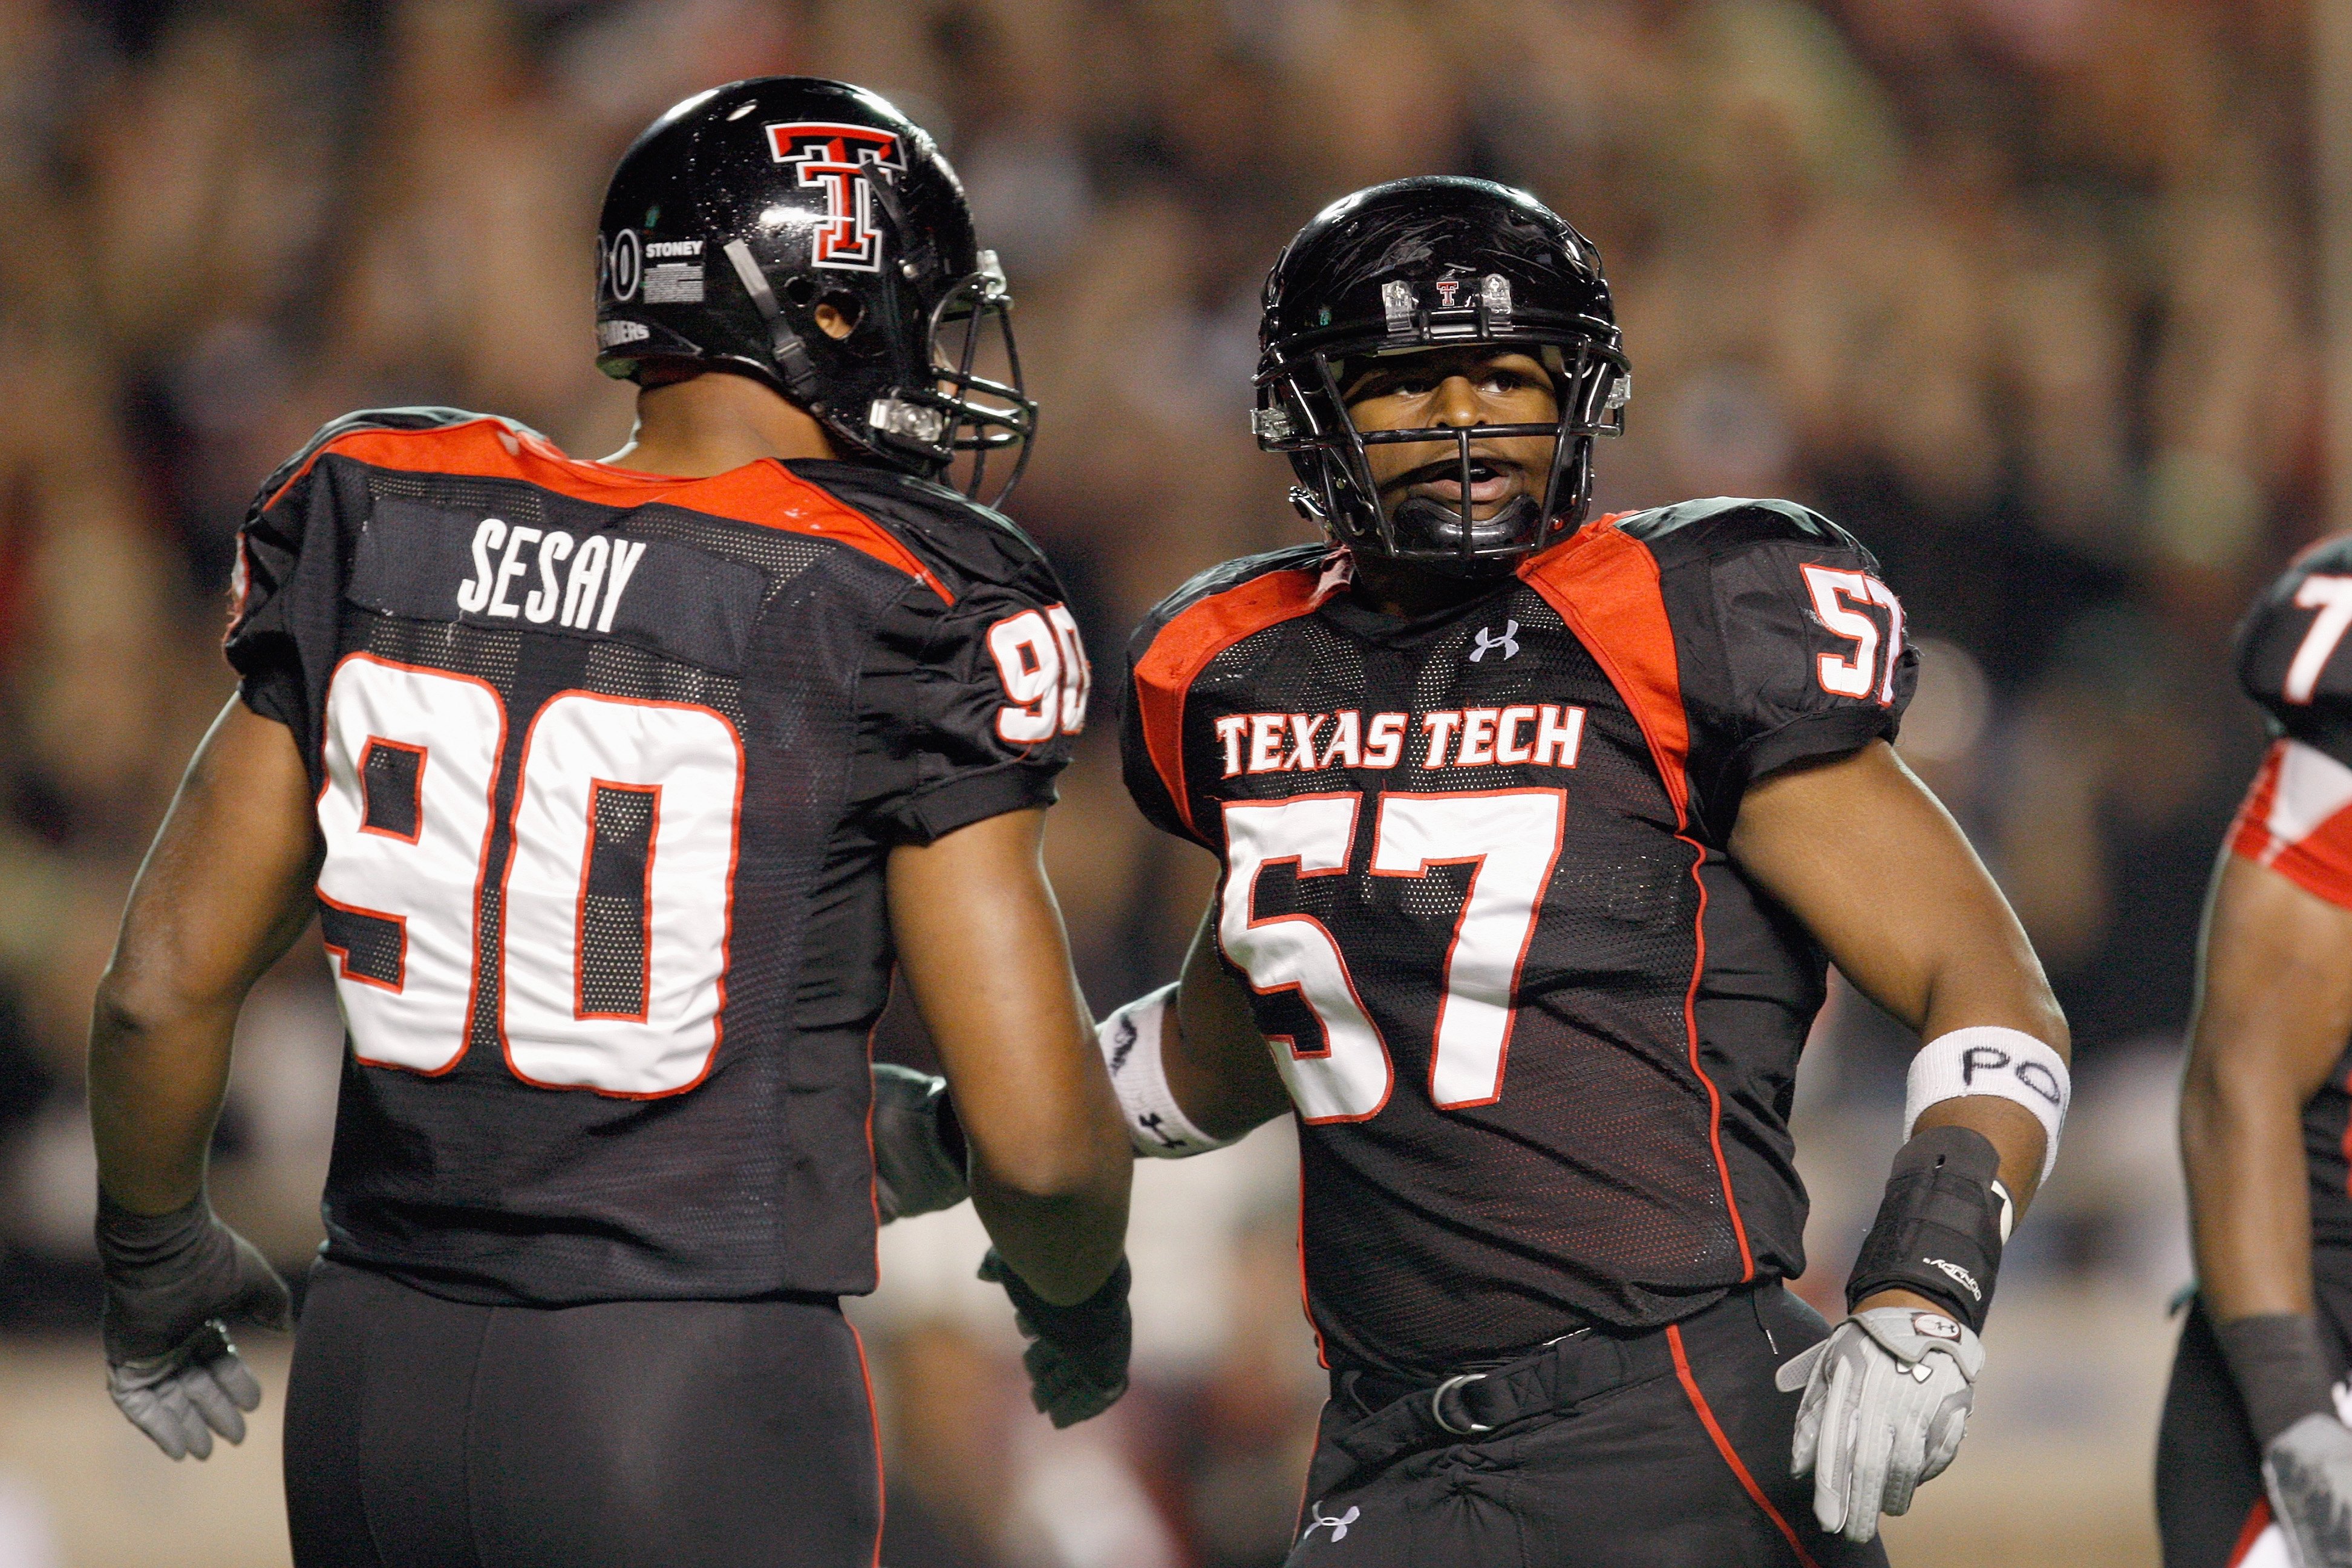 Texas Tech Red Raiders Team-Issued #78 White and Black Jersey from the 2013  NCAA Football Season